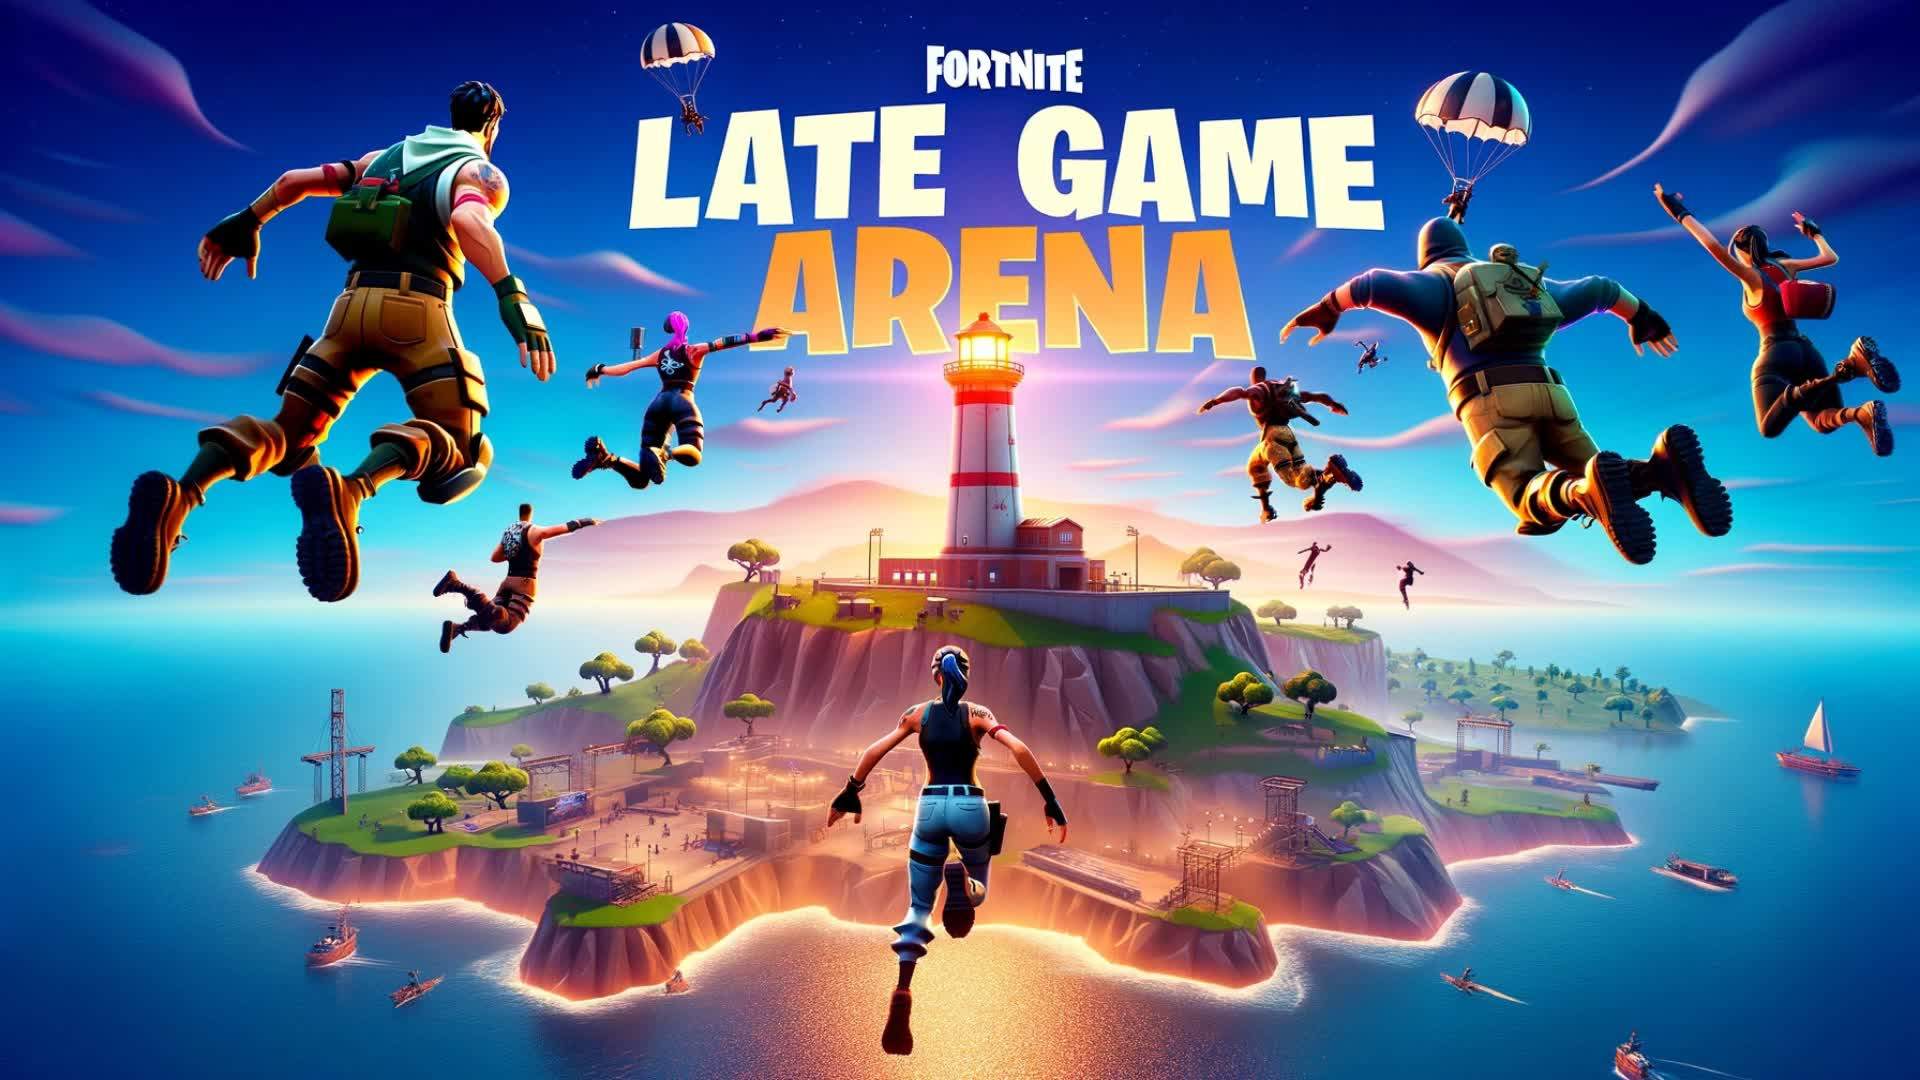 LATE GAME ARENA